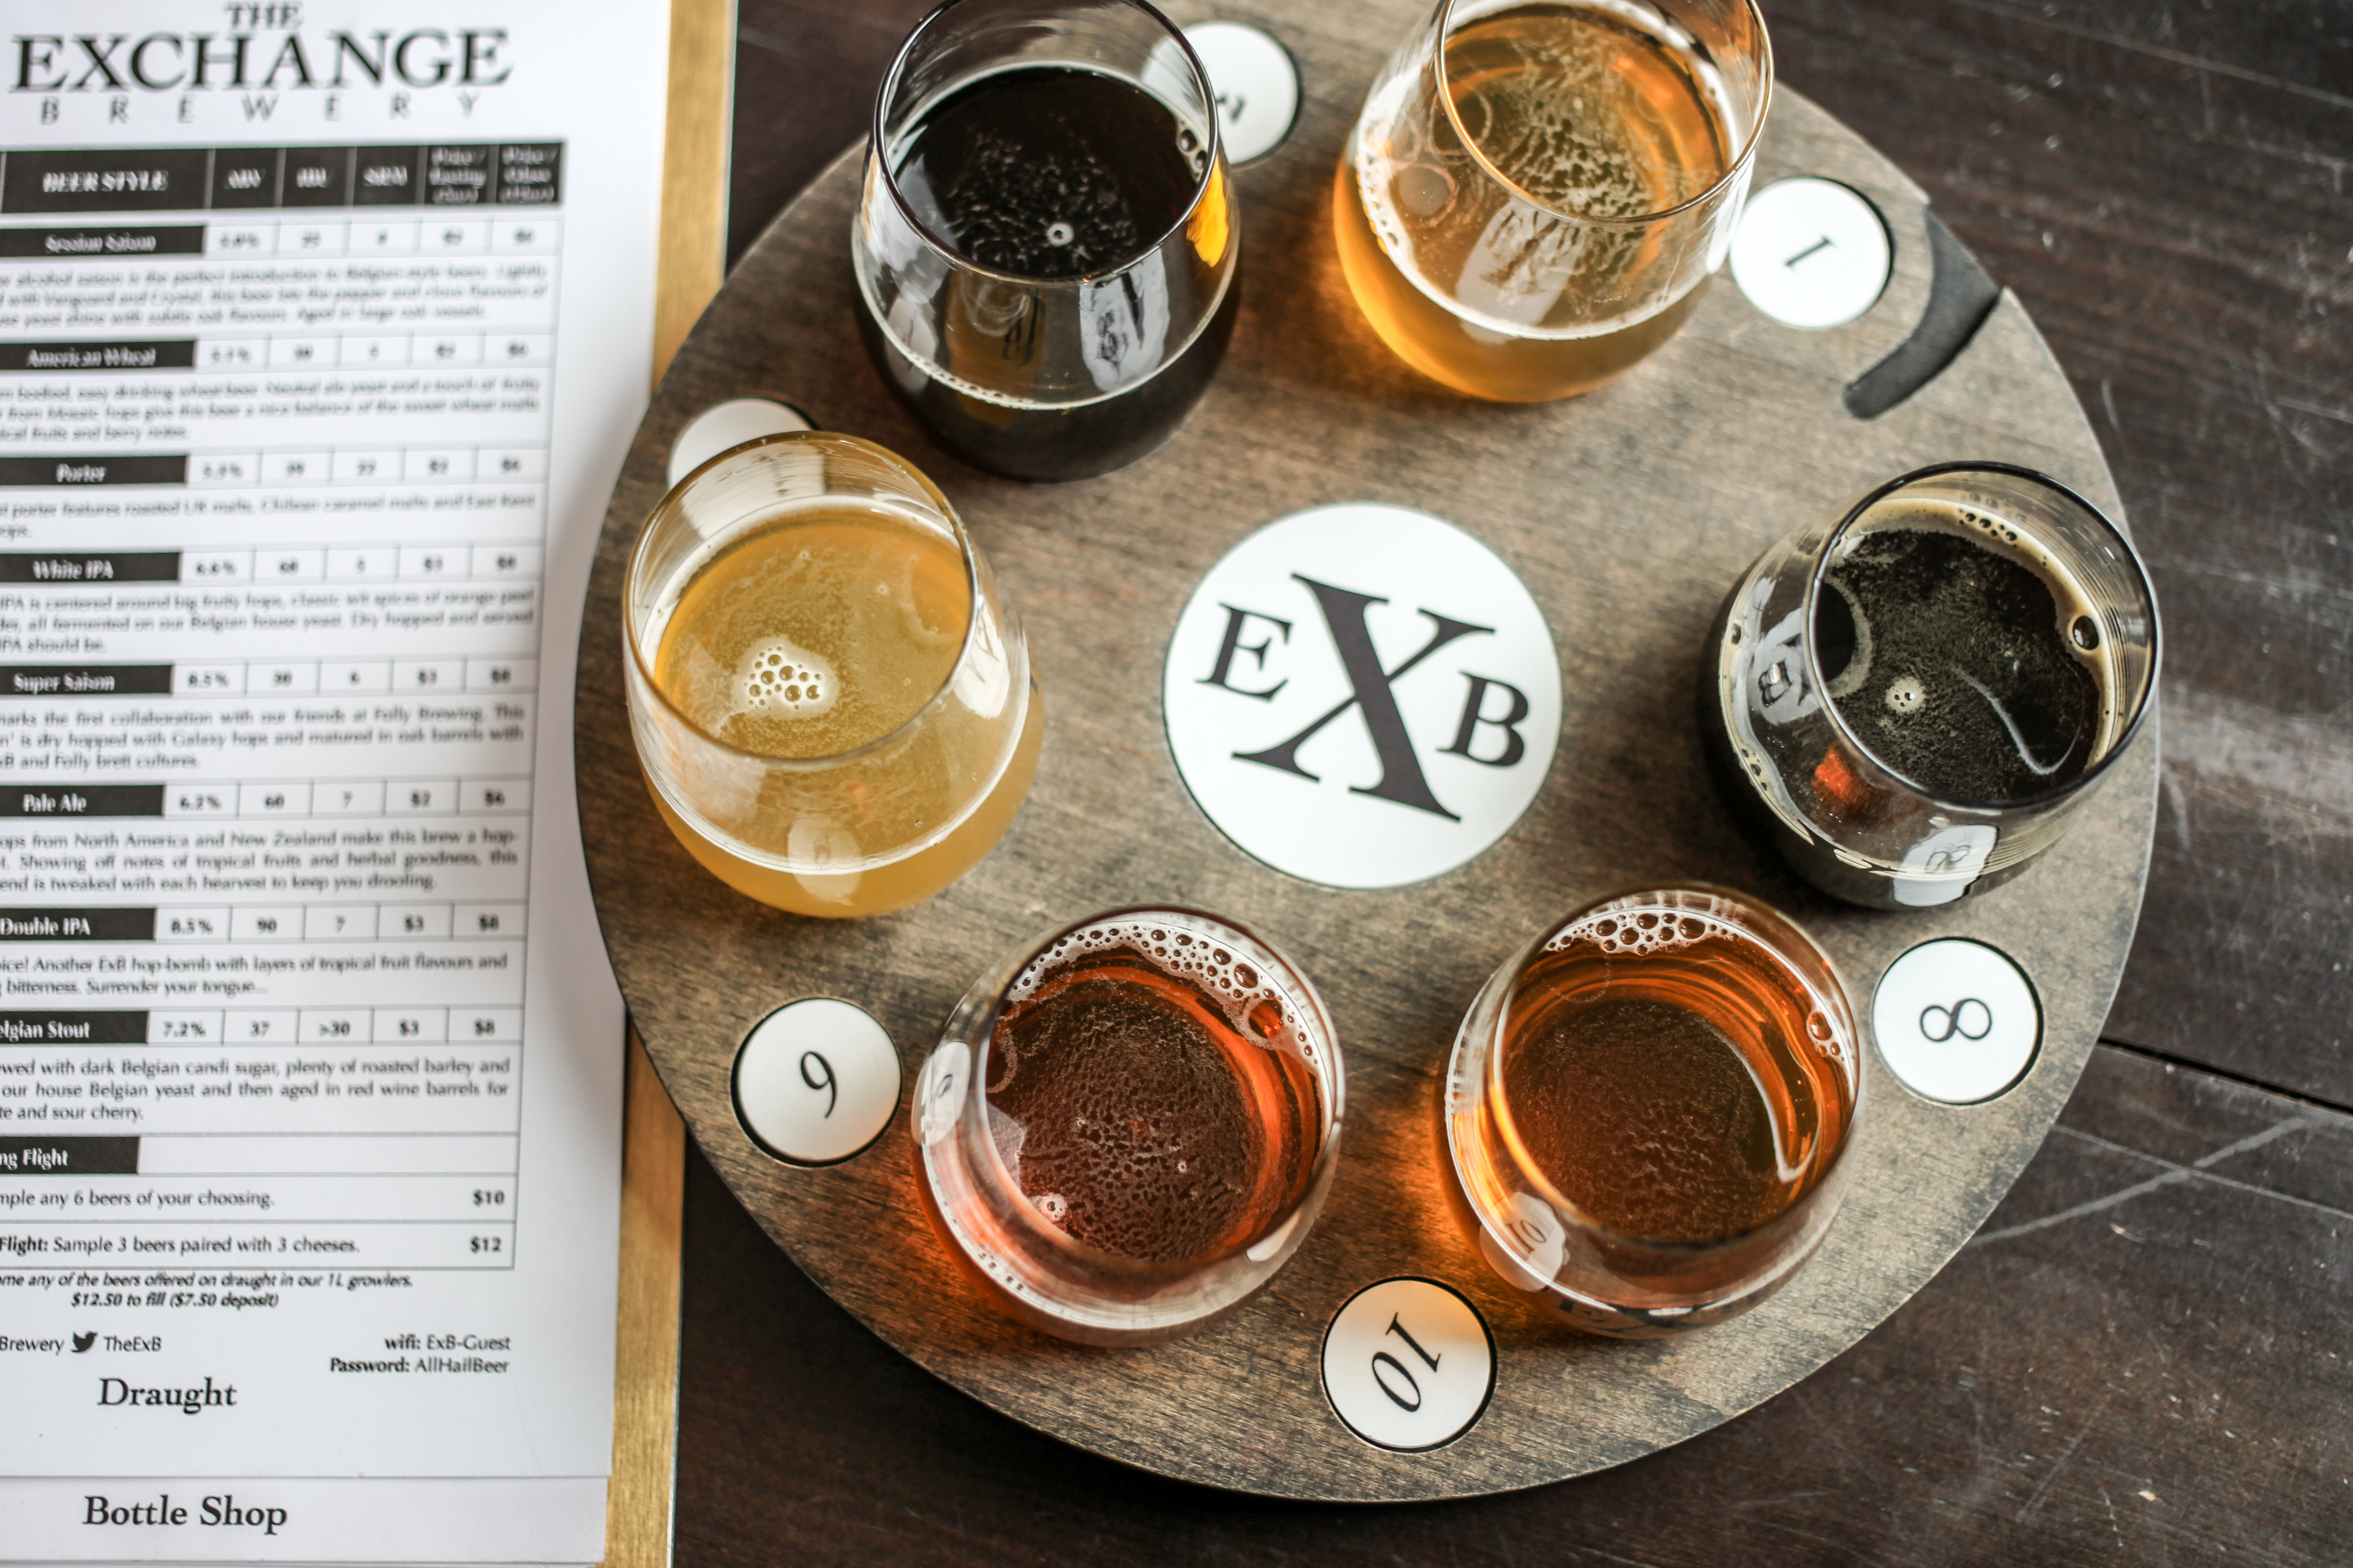 exchange brewery 4